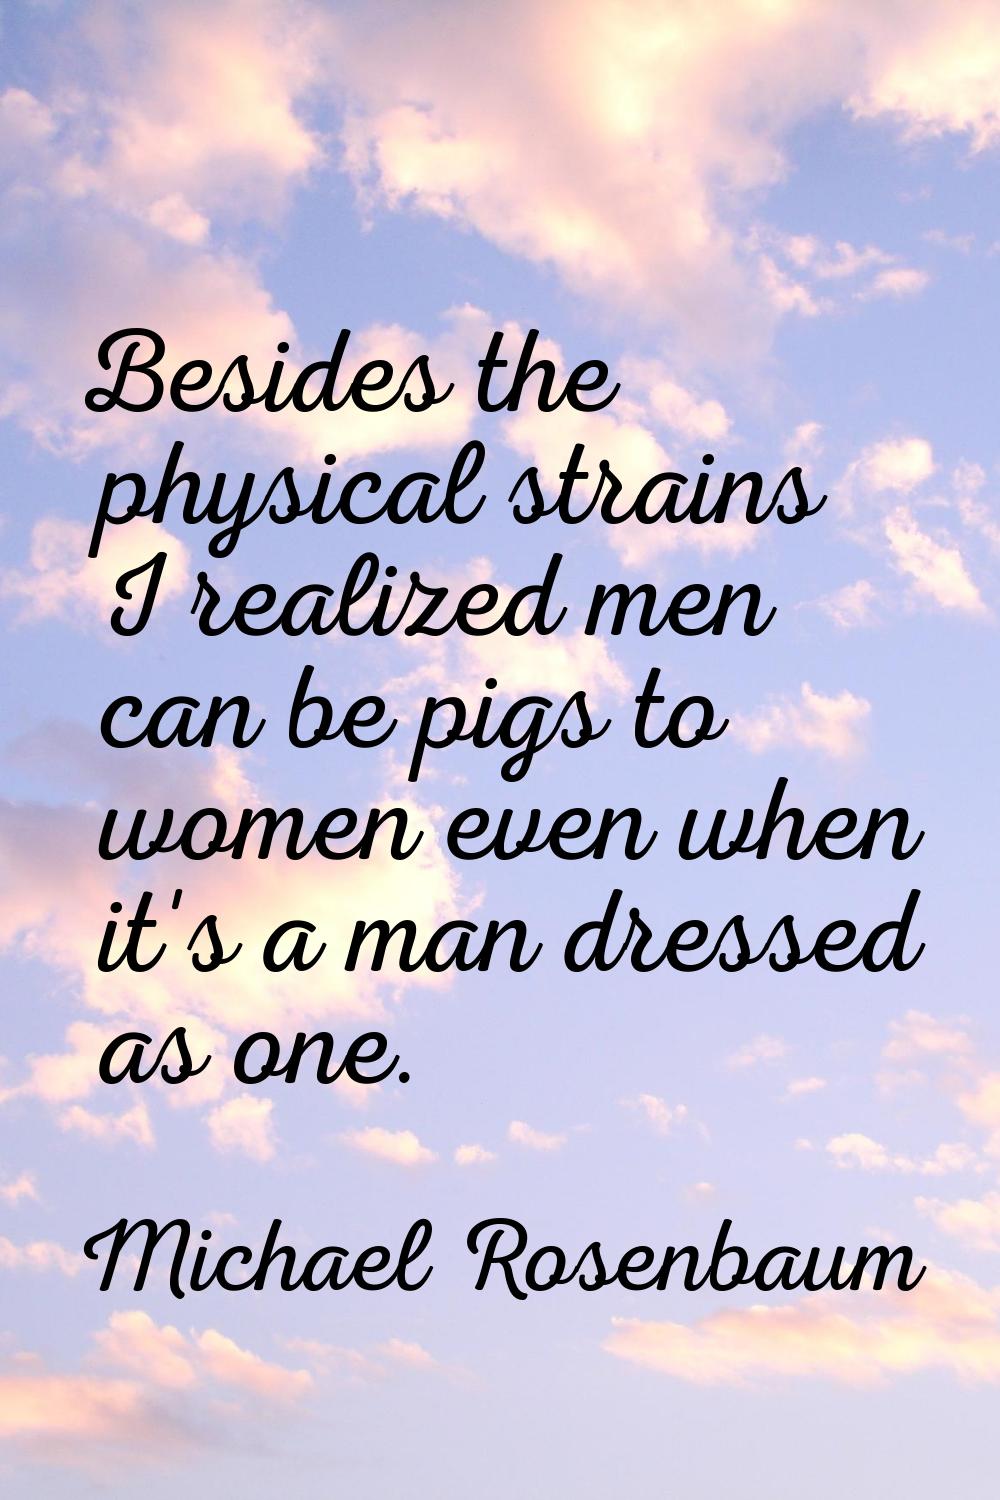 Besides the physical strains I realized men can be pigs to women even when it's a man dressed as on